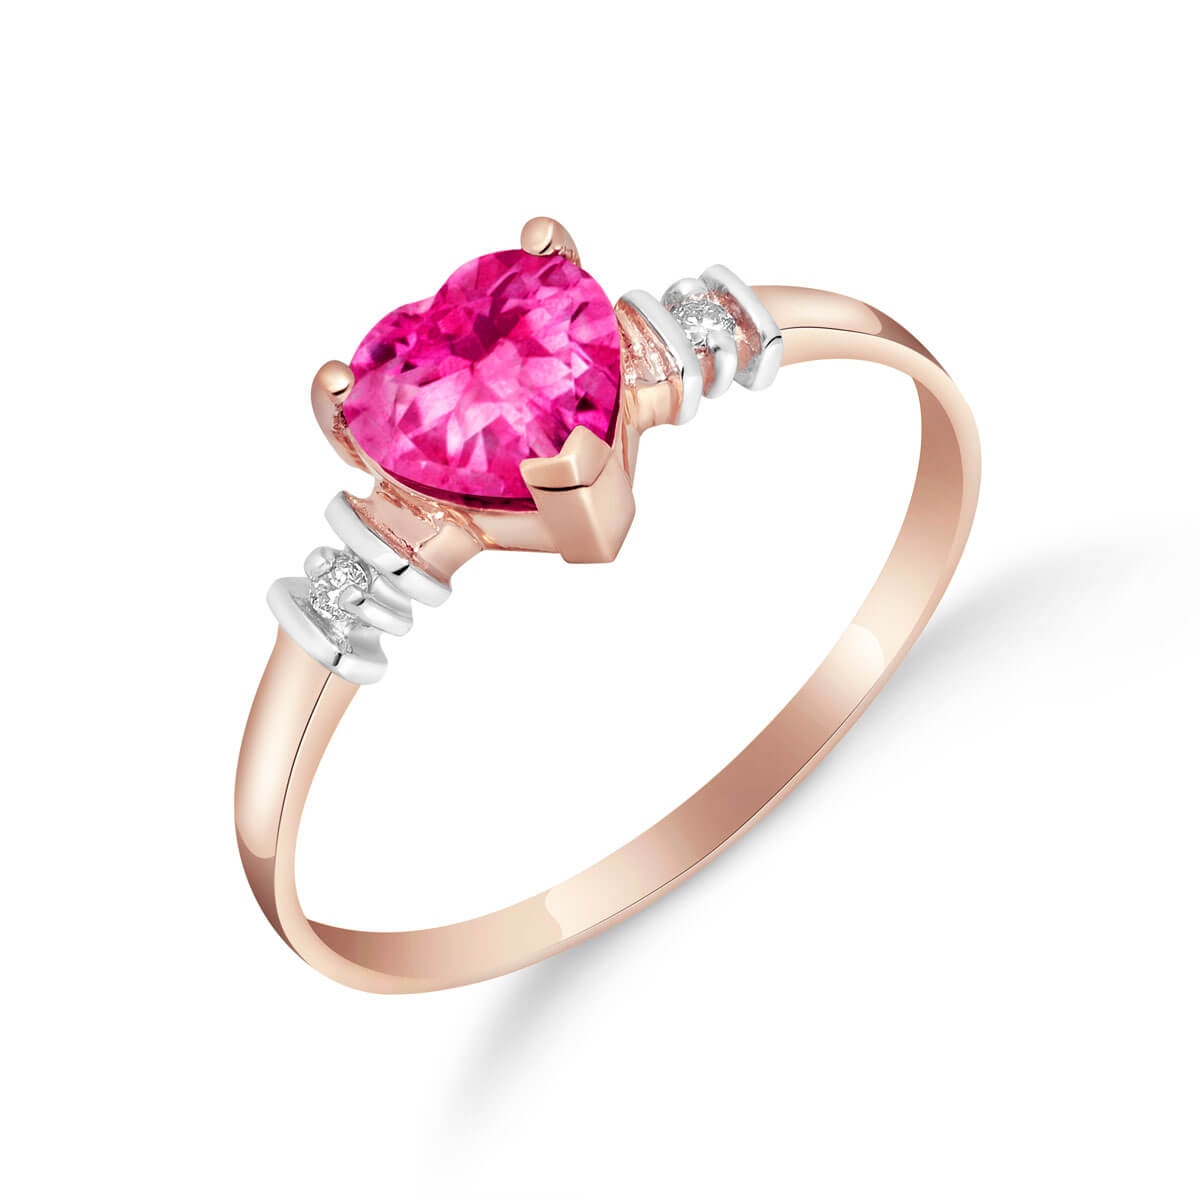 Pink Topaz & Diamond Heart Ring in 18ct Rose Gold